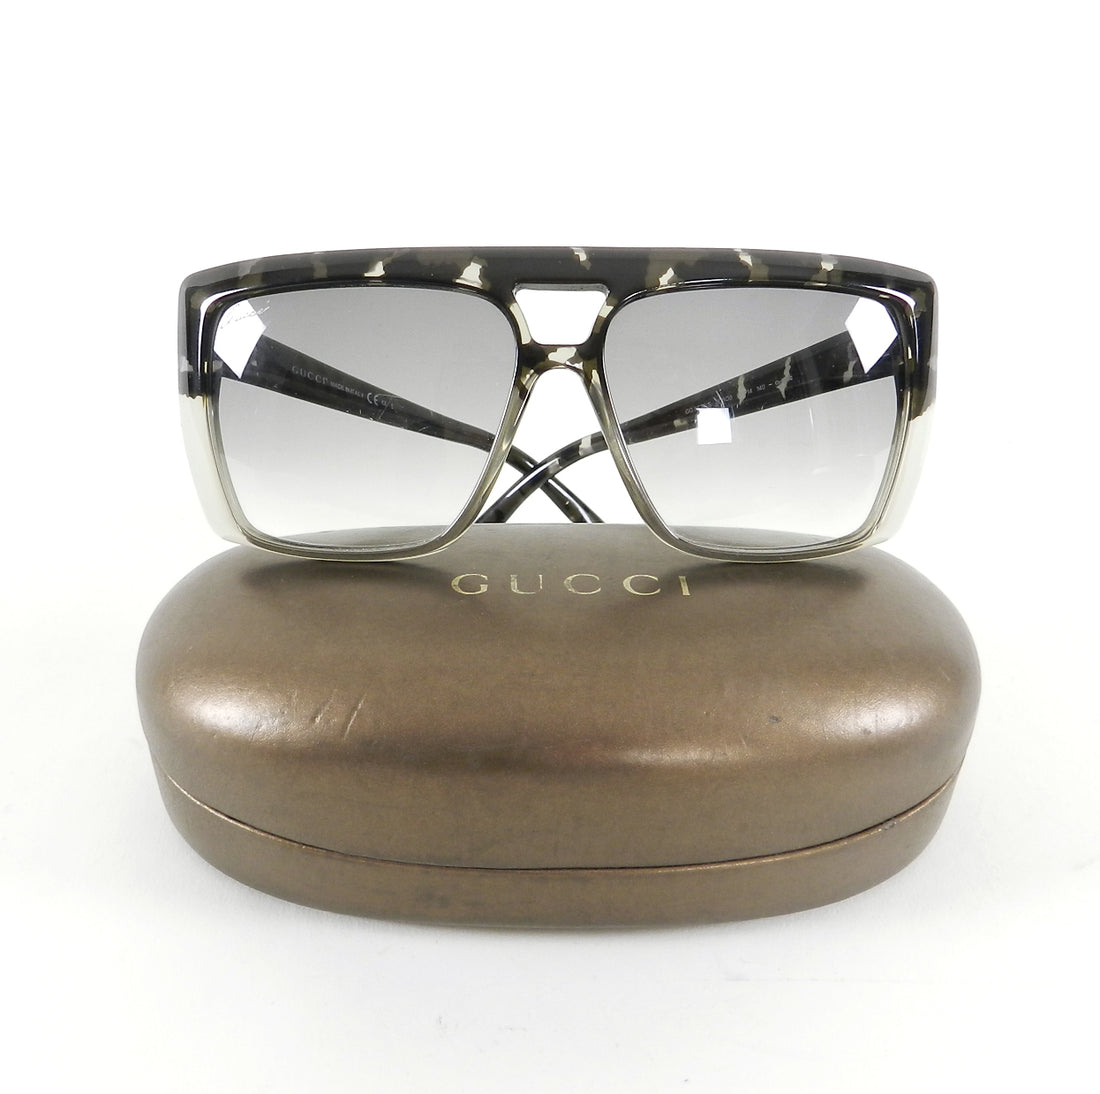 Gucci GG3532 Grey Tortoise and Clear Sunglasses in Case